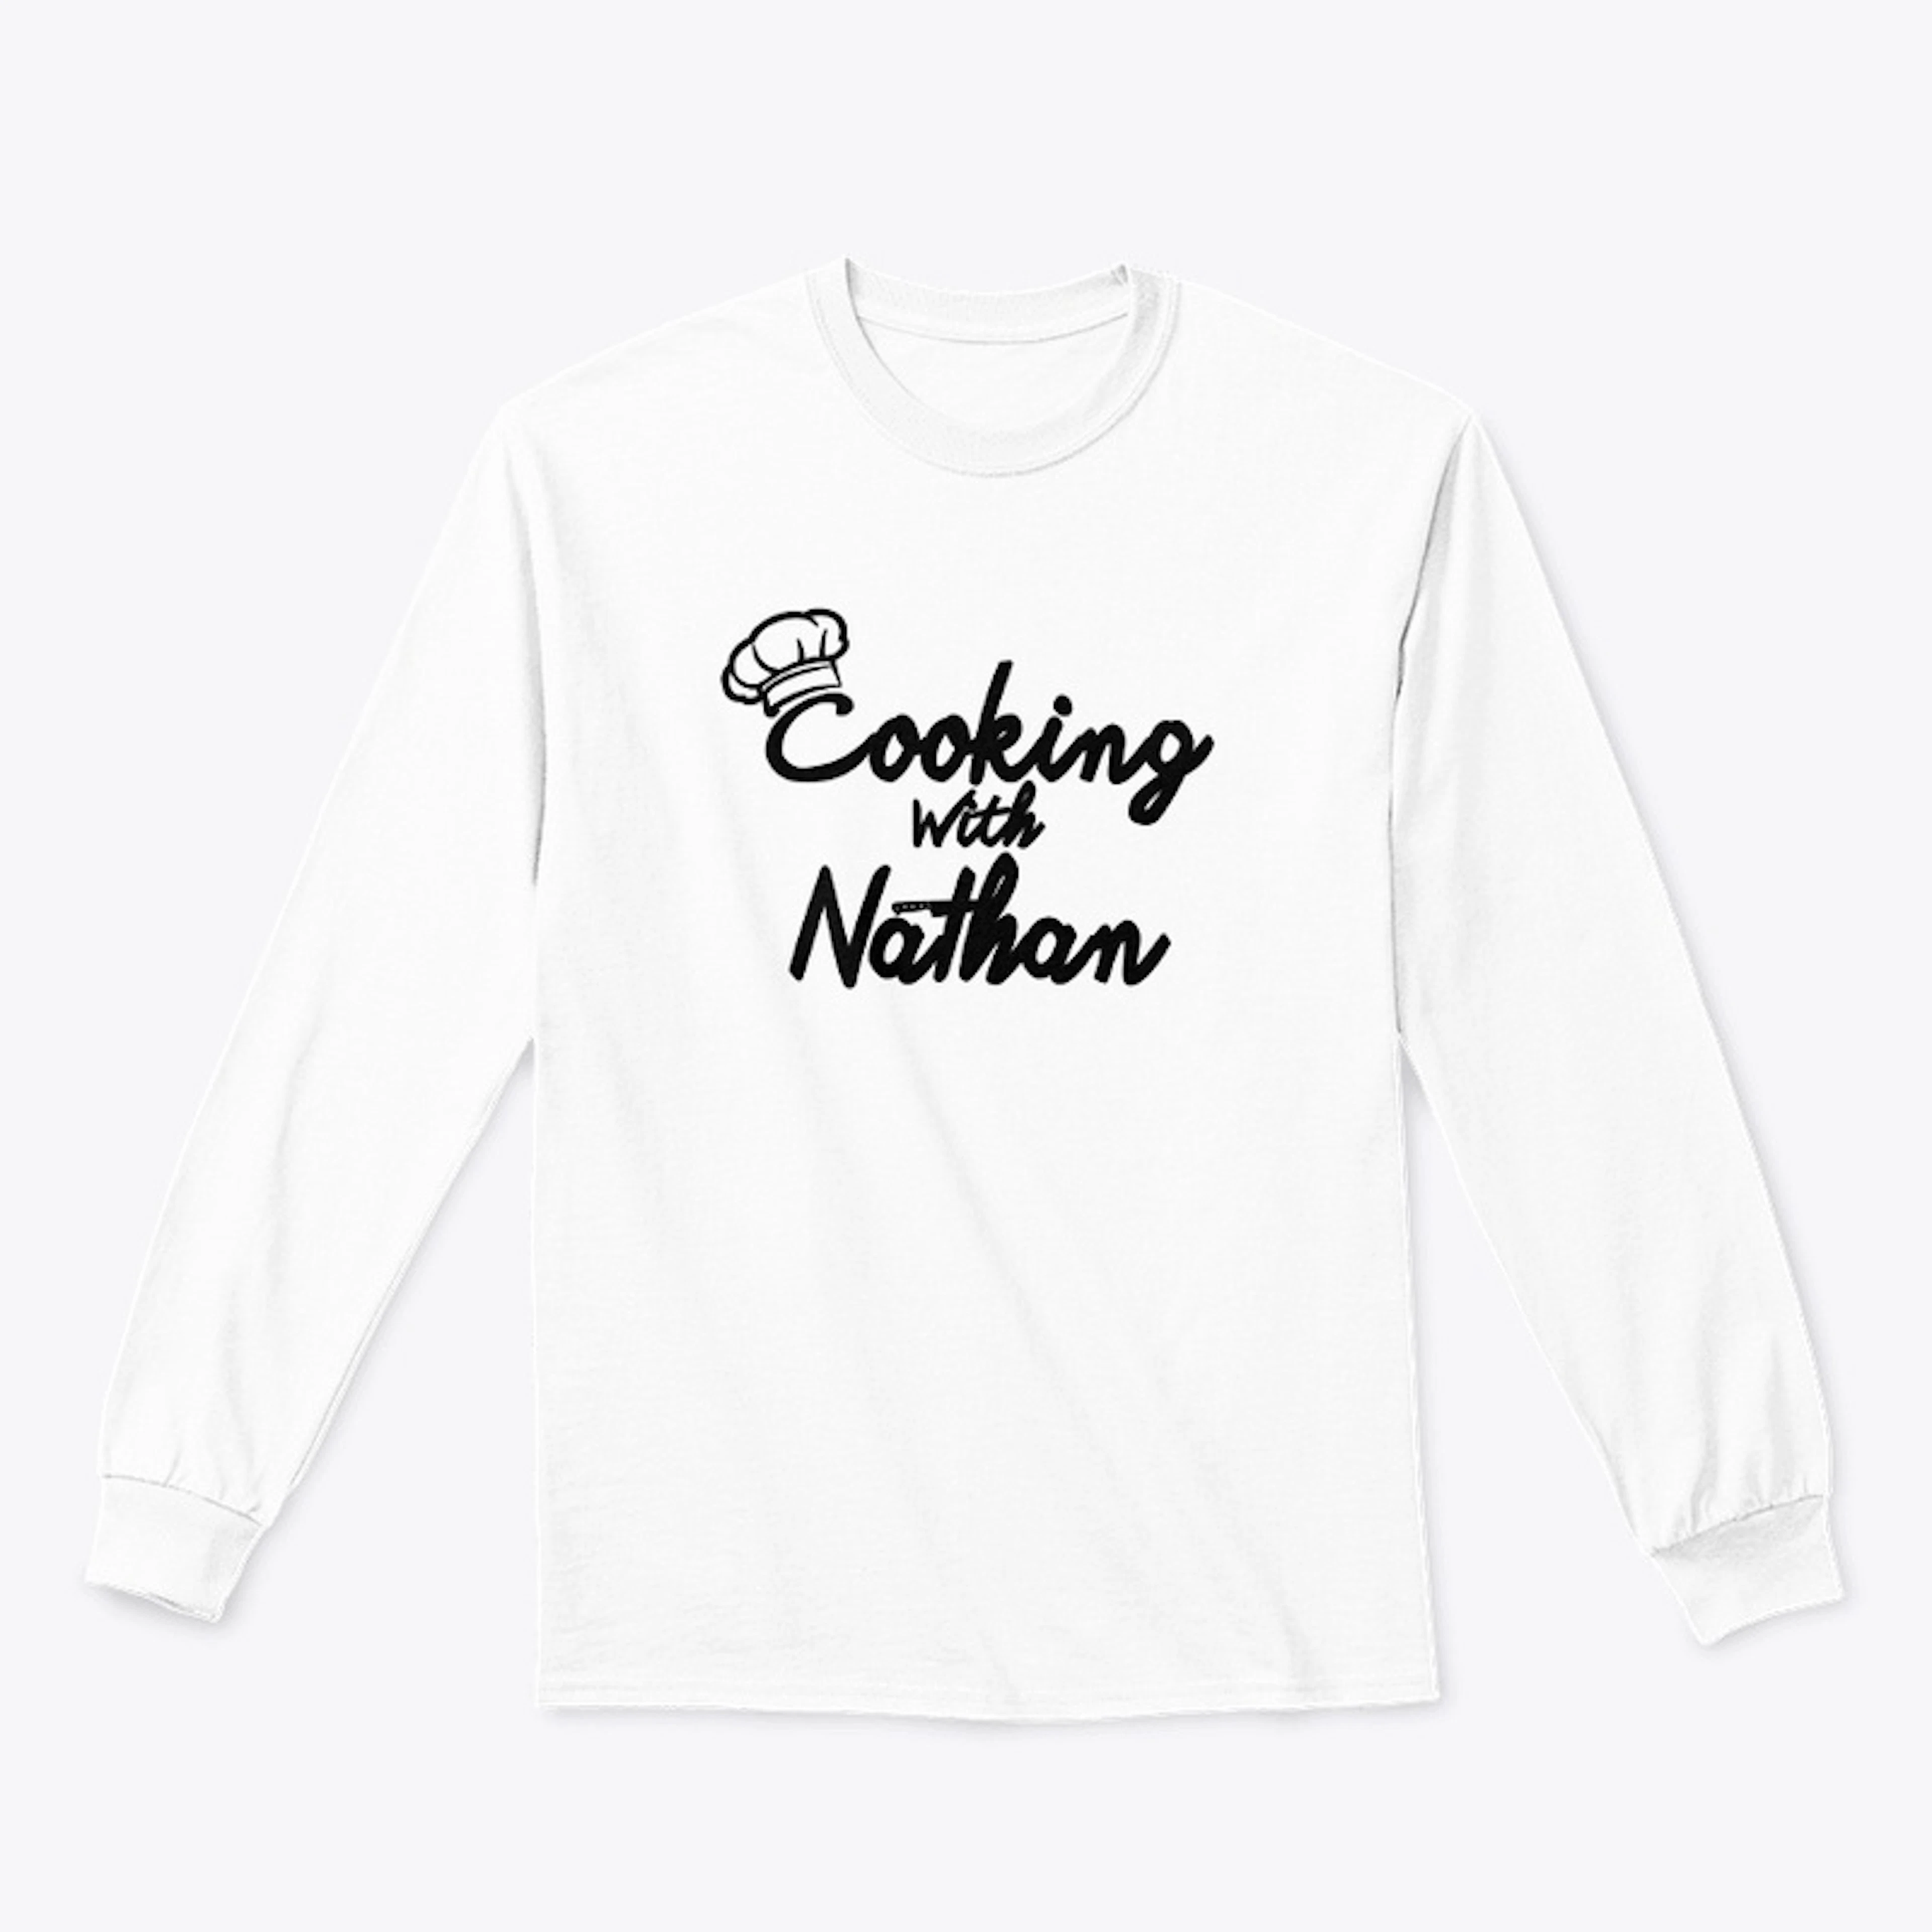 Cooking with Nathan black design